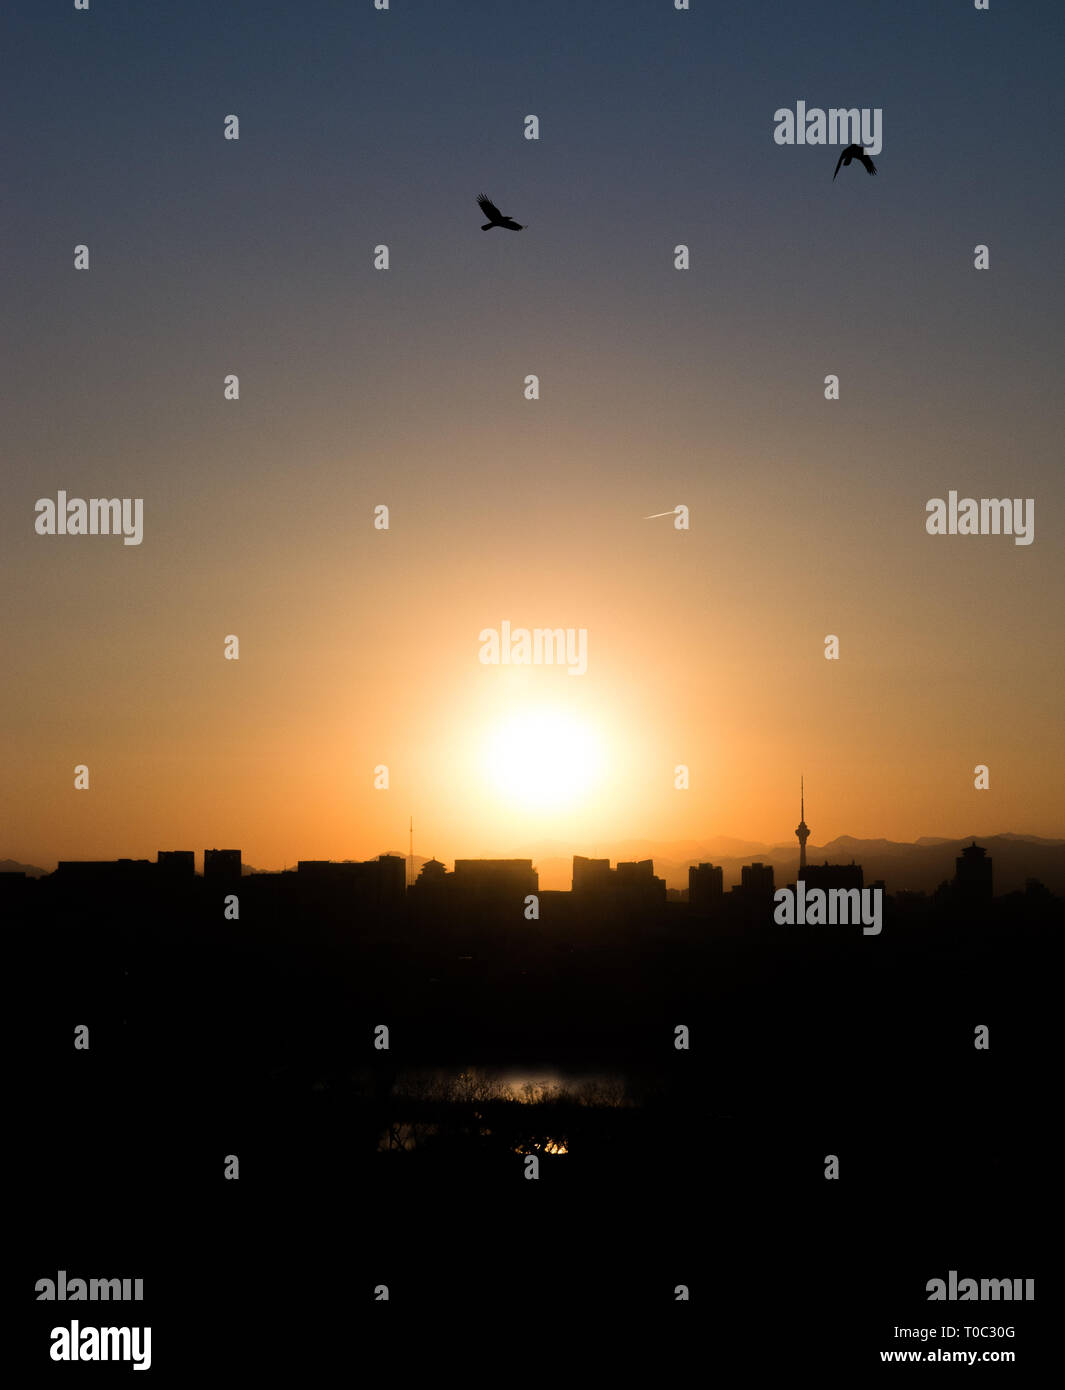 Cityscape silhouette of Beijing downtown and skyline at sunset with birds in the foreground Stock Photo